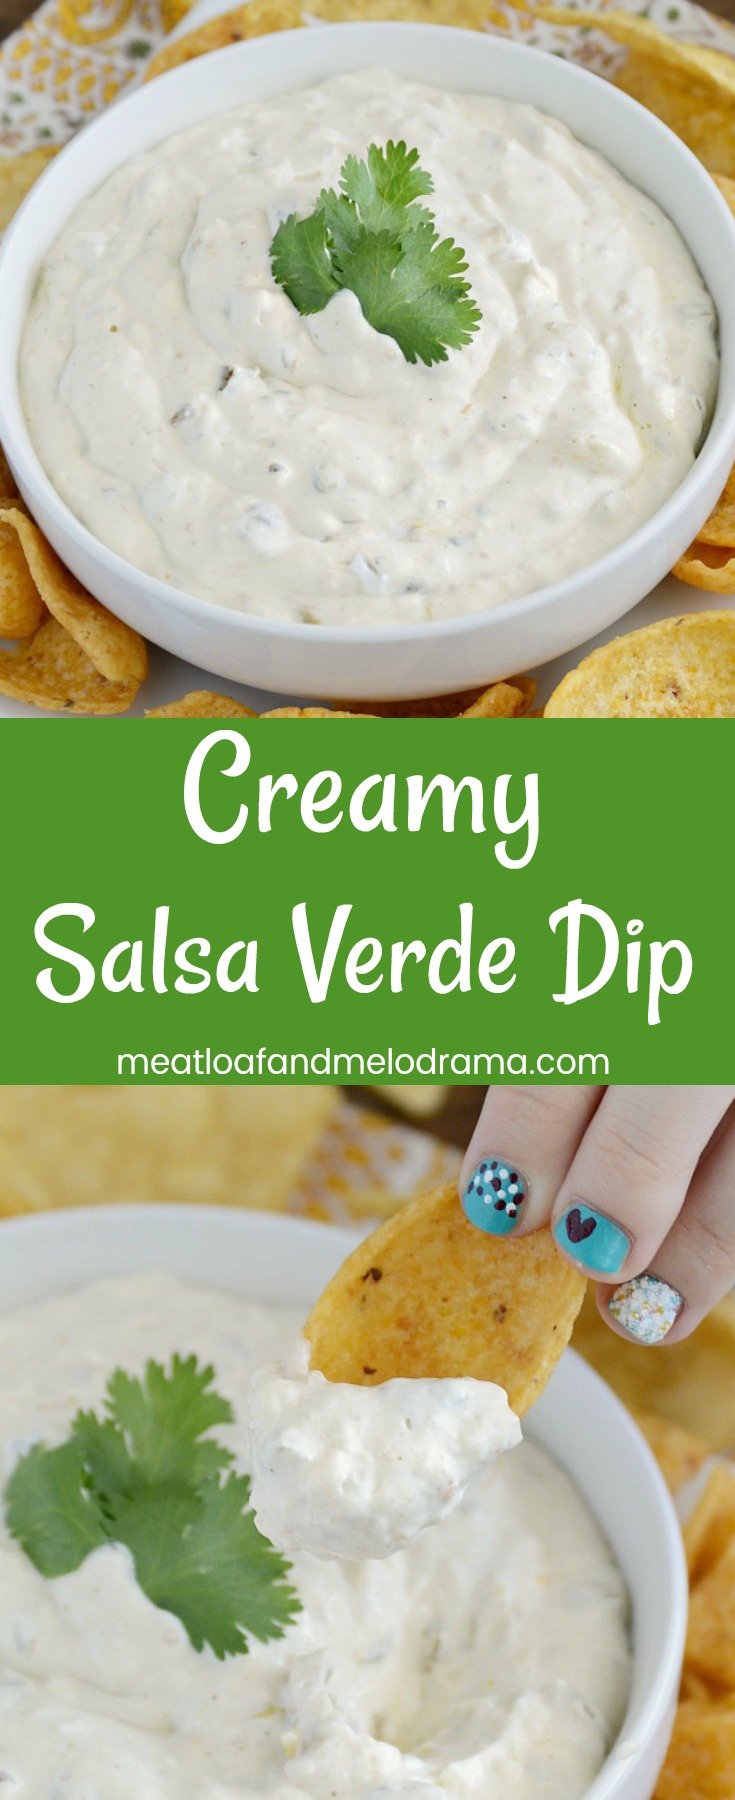 Creamy Salsa Verde Dip is an easy chip dip made in less than 5 minutes with only 3 ingredients. It's perfect for parties, potlucks, game day or every day snacking!